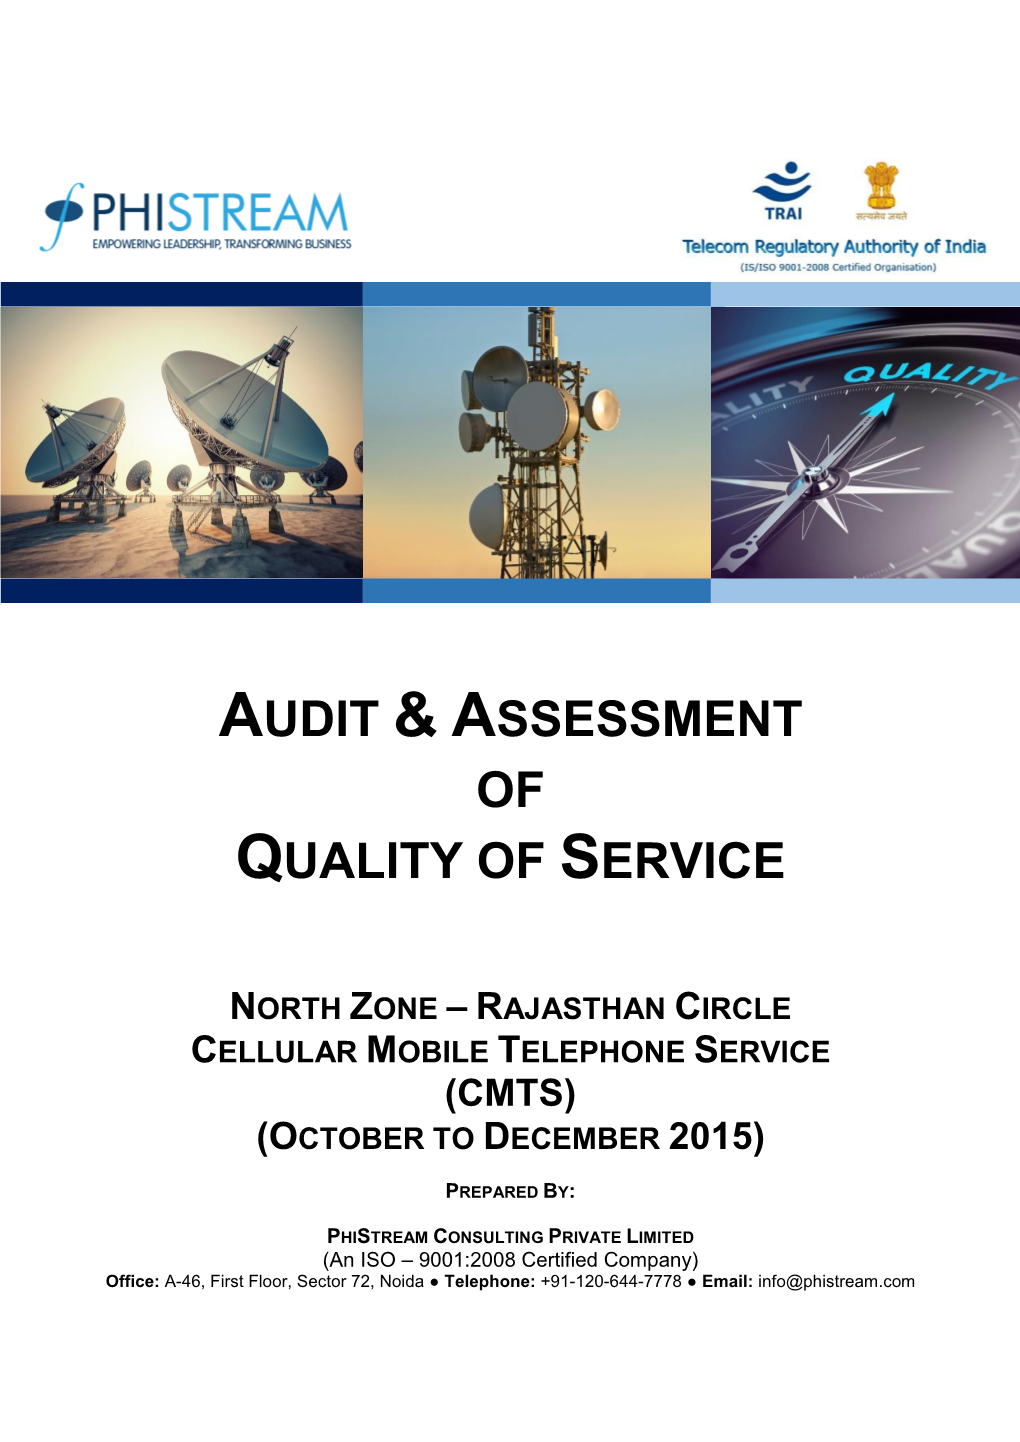 Audit & Assessment of Quality of Service